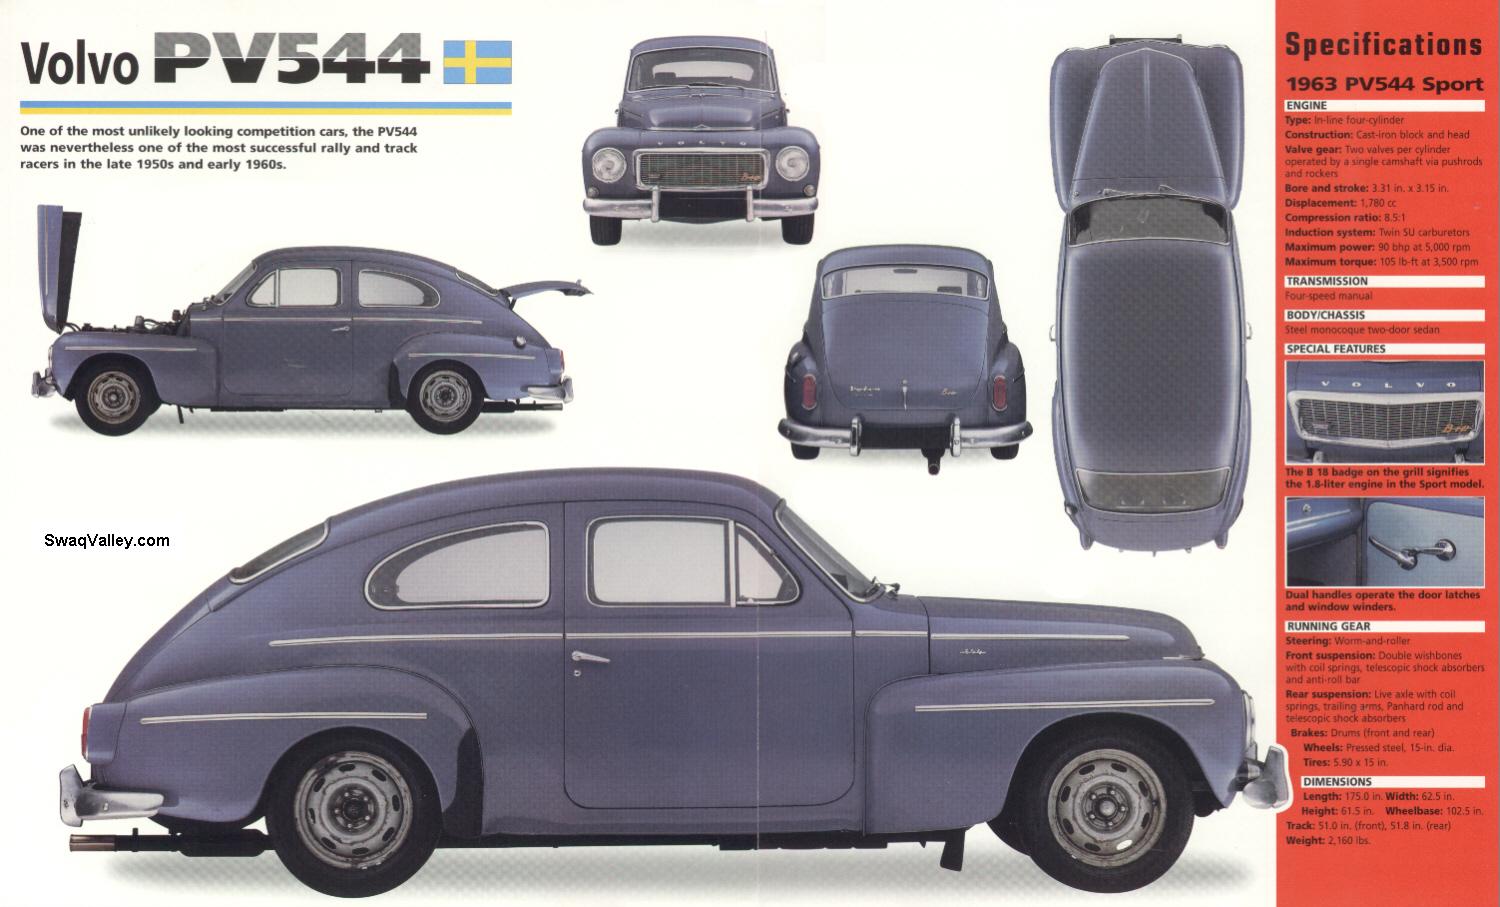 Volvo PV 544 C. View Download Wallpaper. 1500x907. Comments